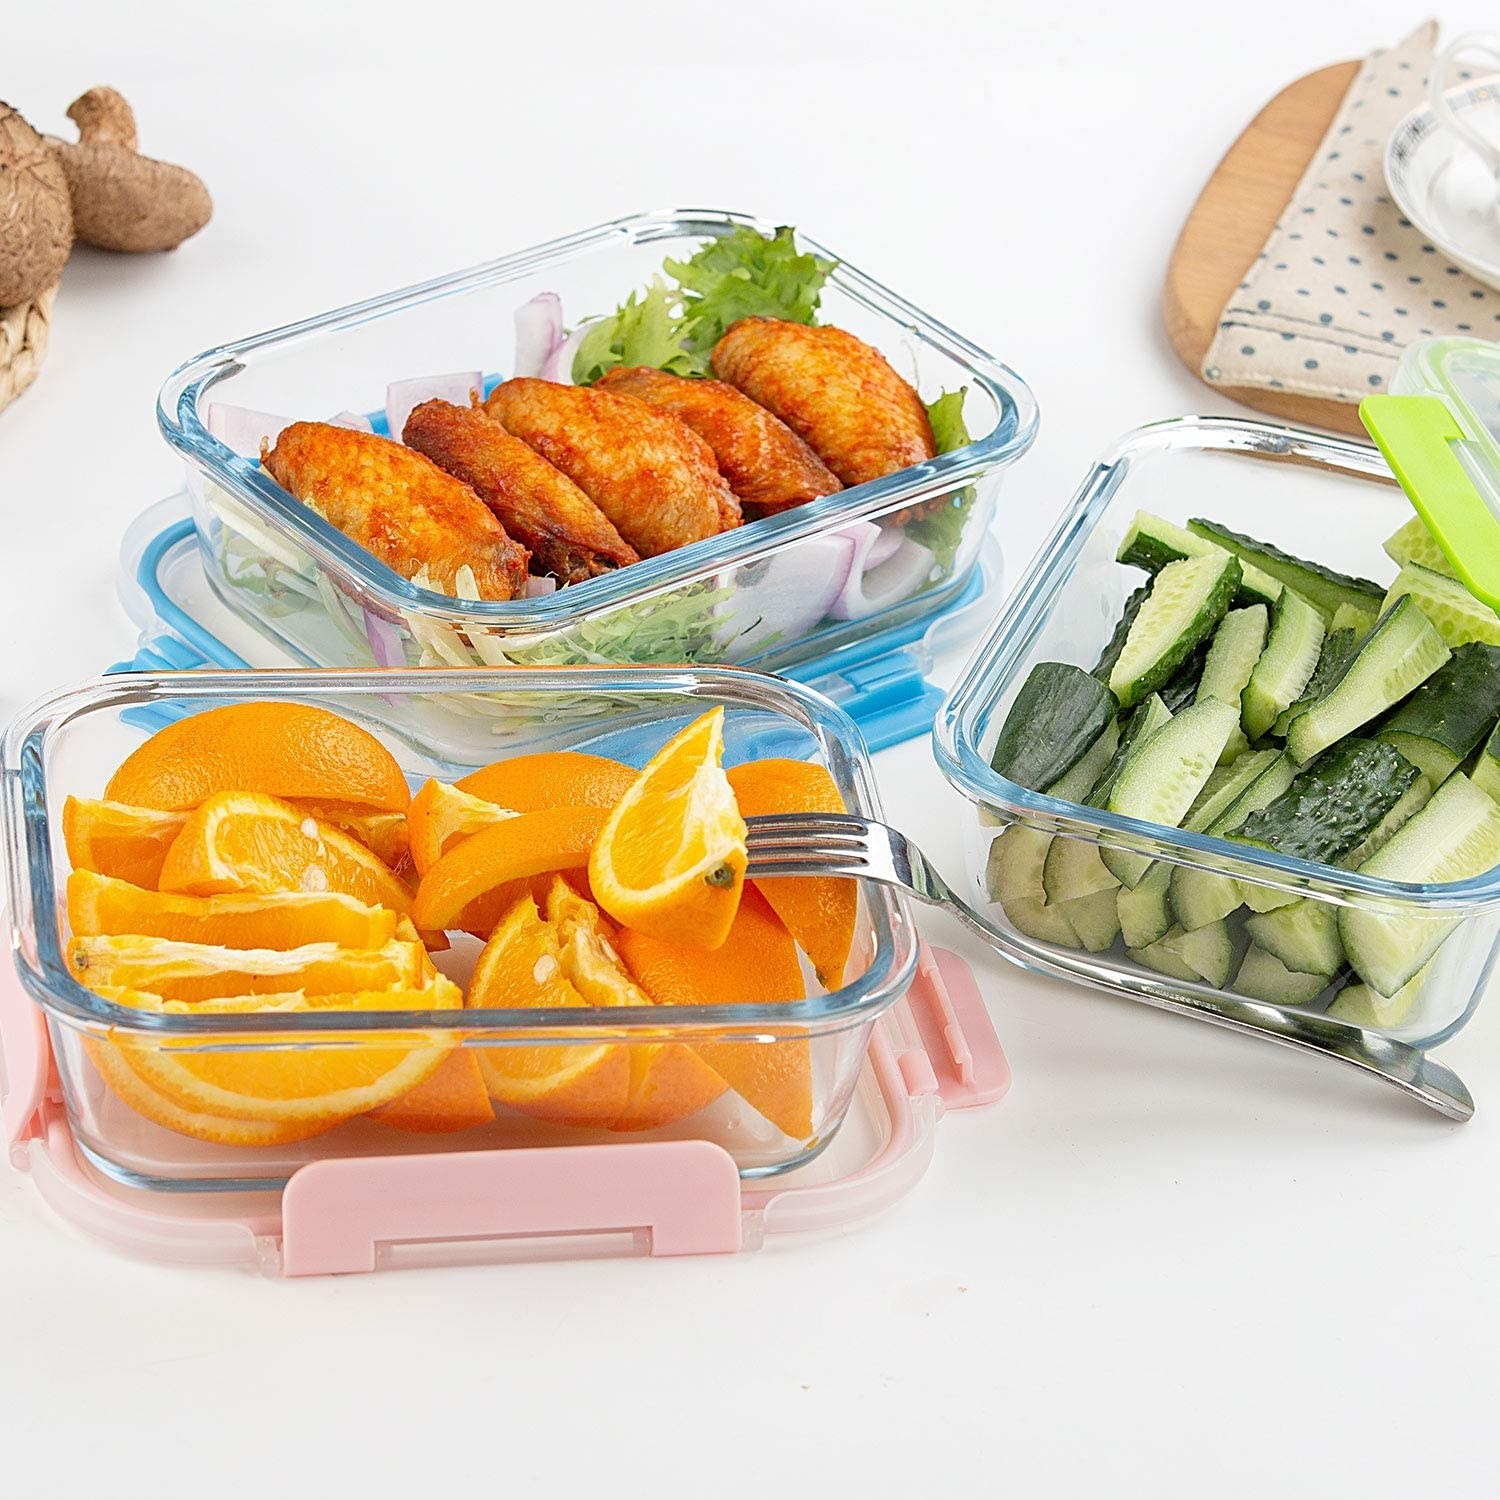 Three meal prep containers holding orange slices, cucumber slices, and chicken wings